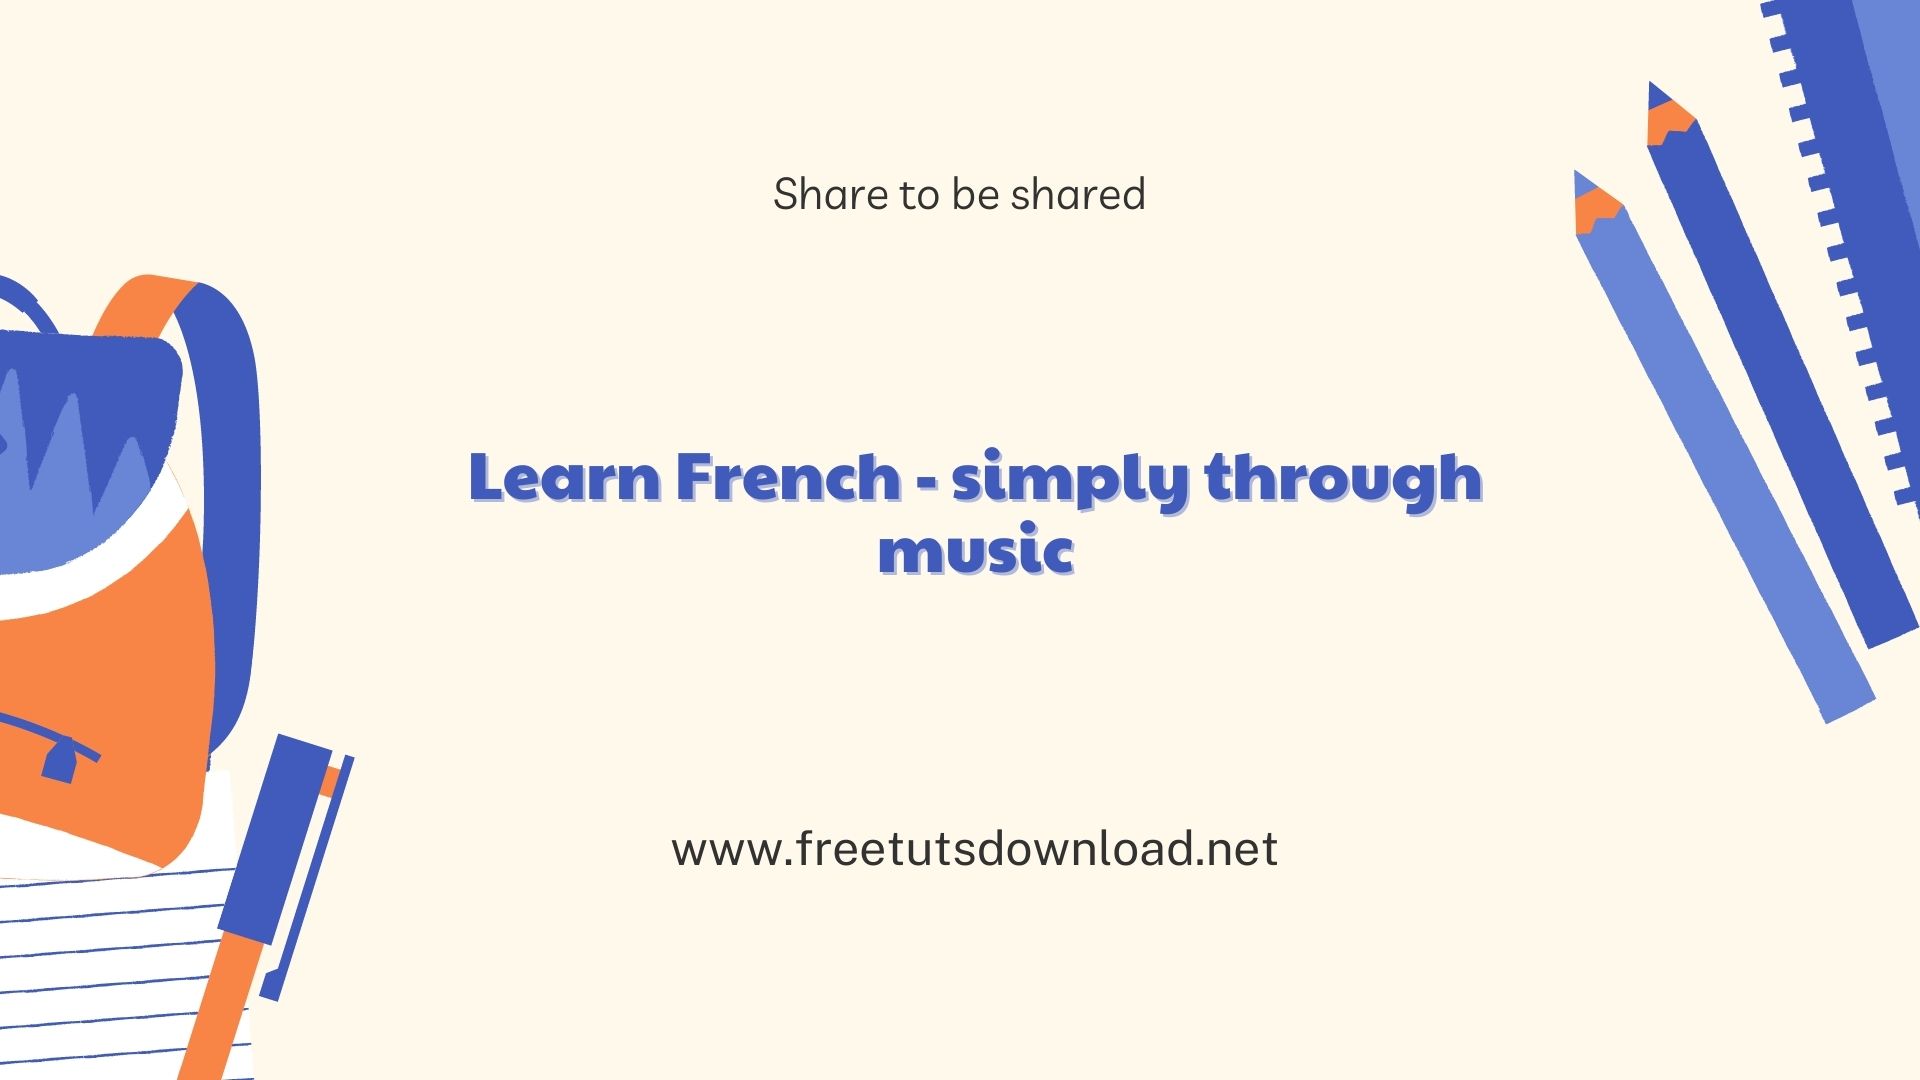 Learn French - simply through music